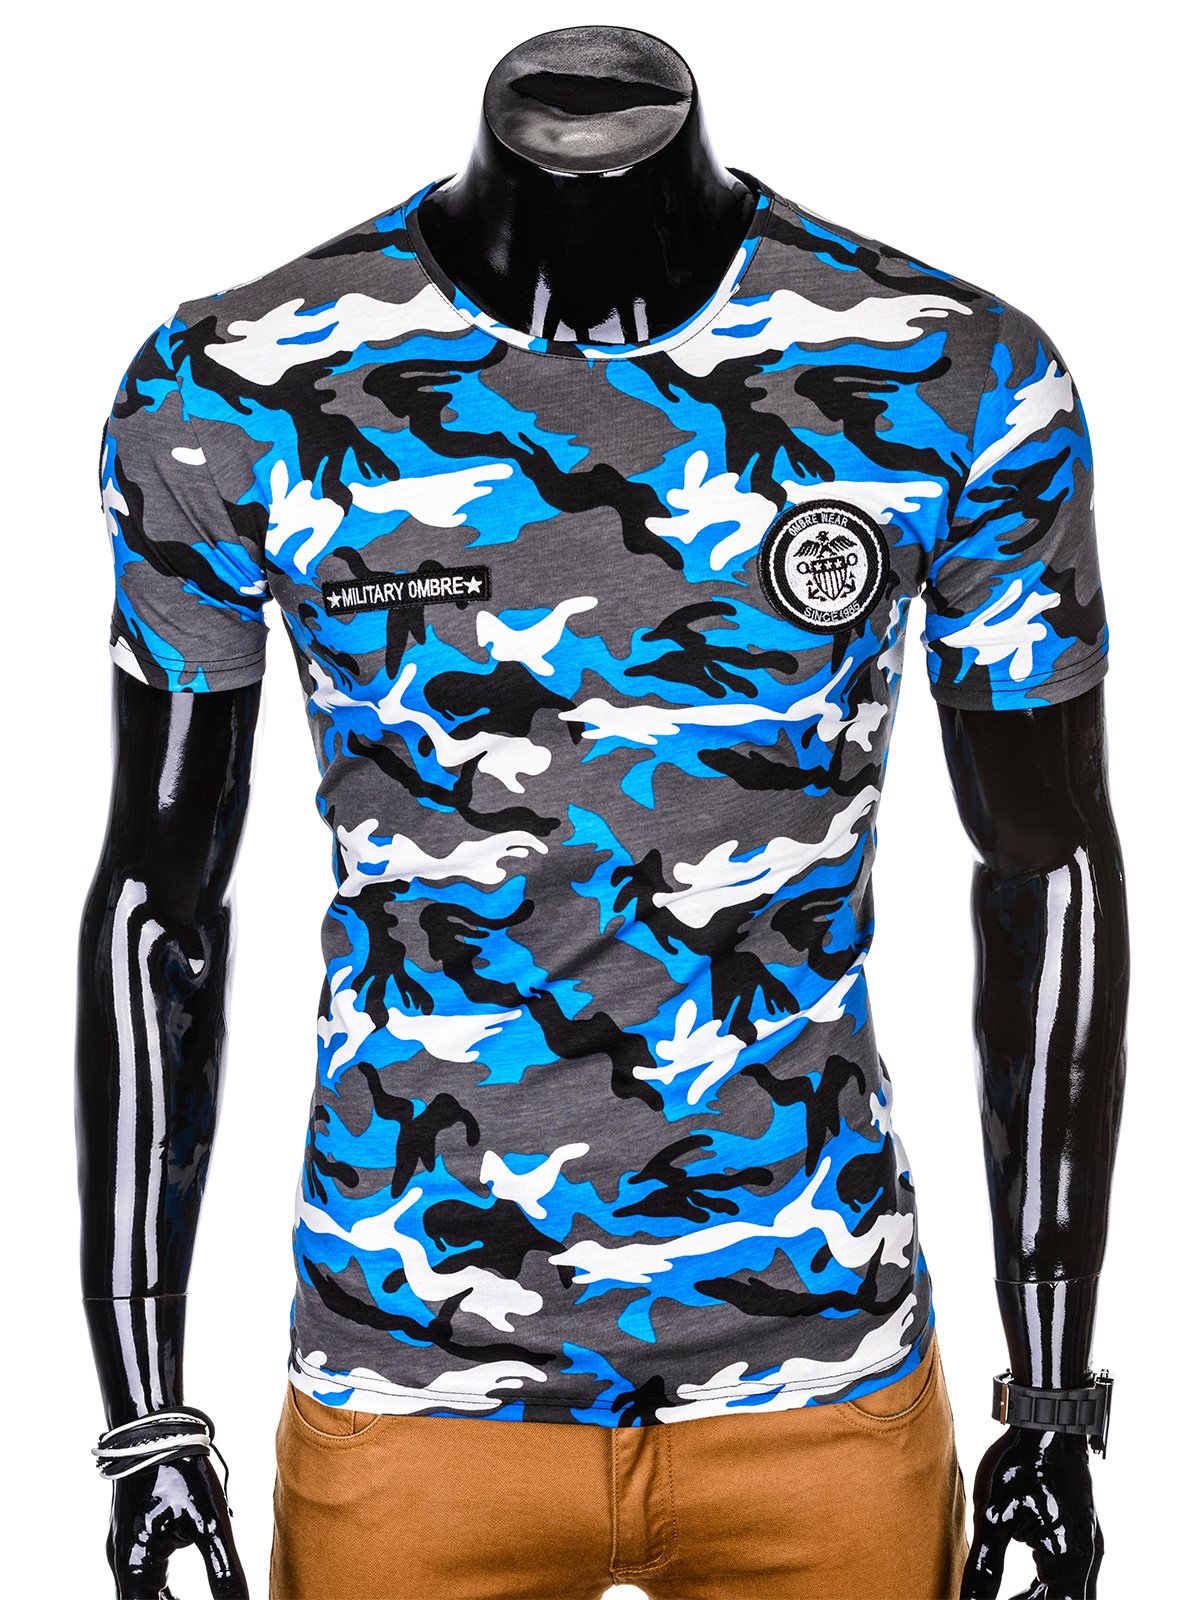  Men Camouflage Blue and Black T-Shirt Printed Short